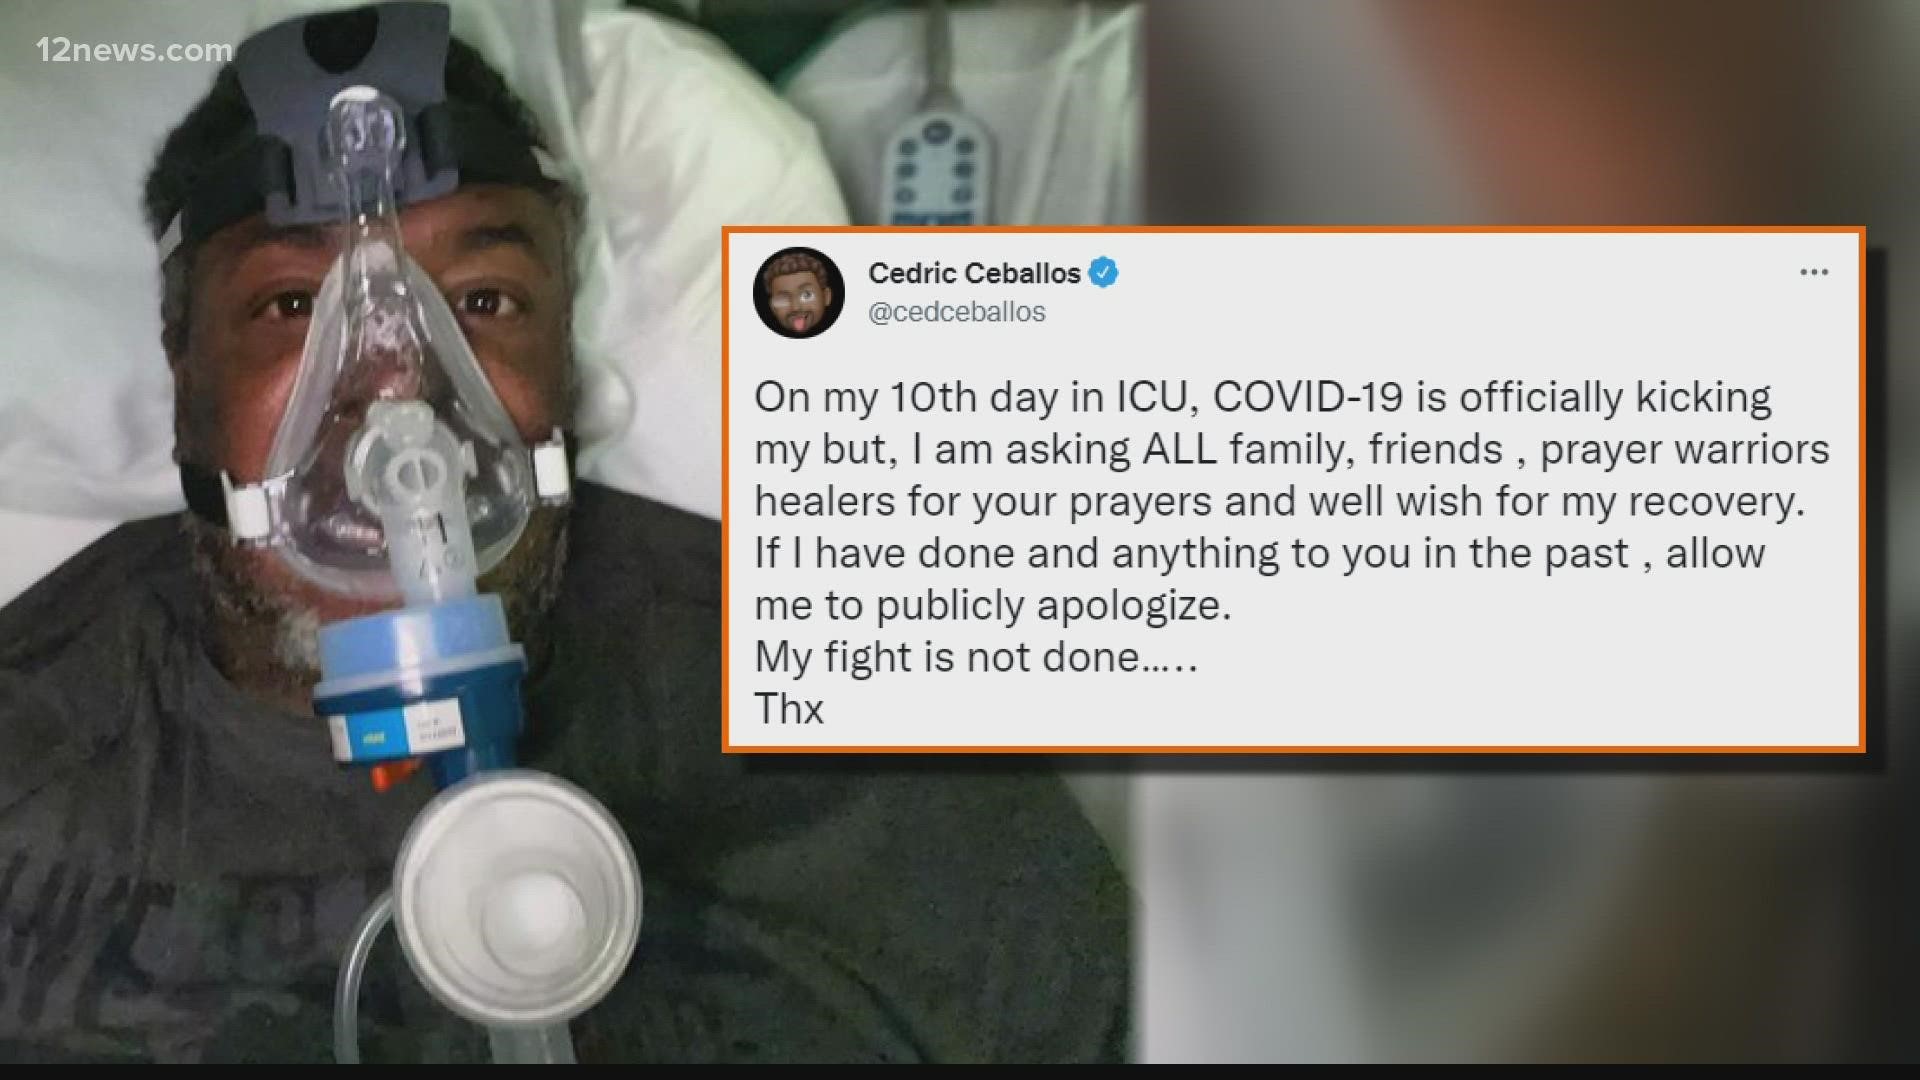 The pandemic is hitting close to home for Suns fans. Former Suns All-Star Cedric Ceballos has been in the ICU for more than a week battling the coronavirus.